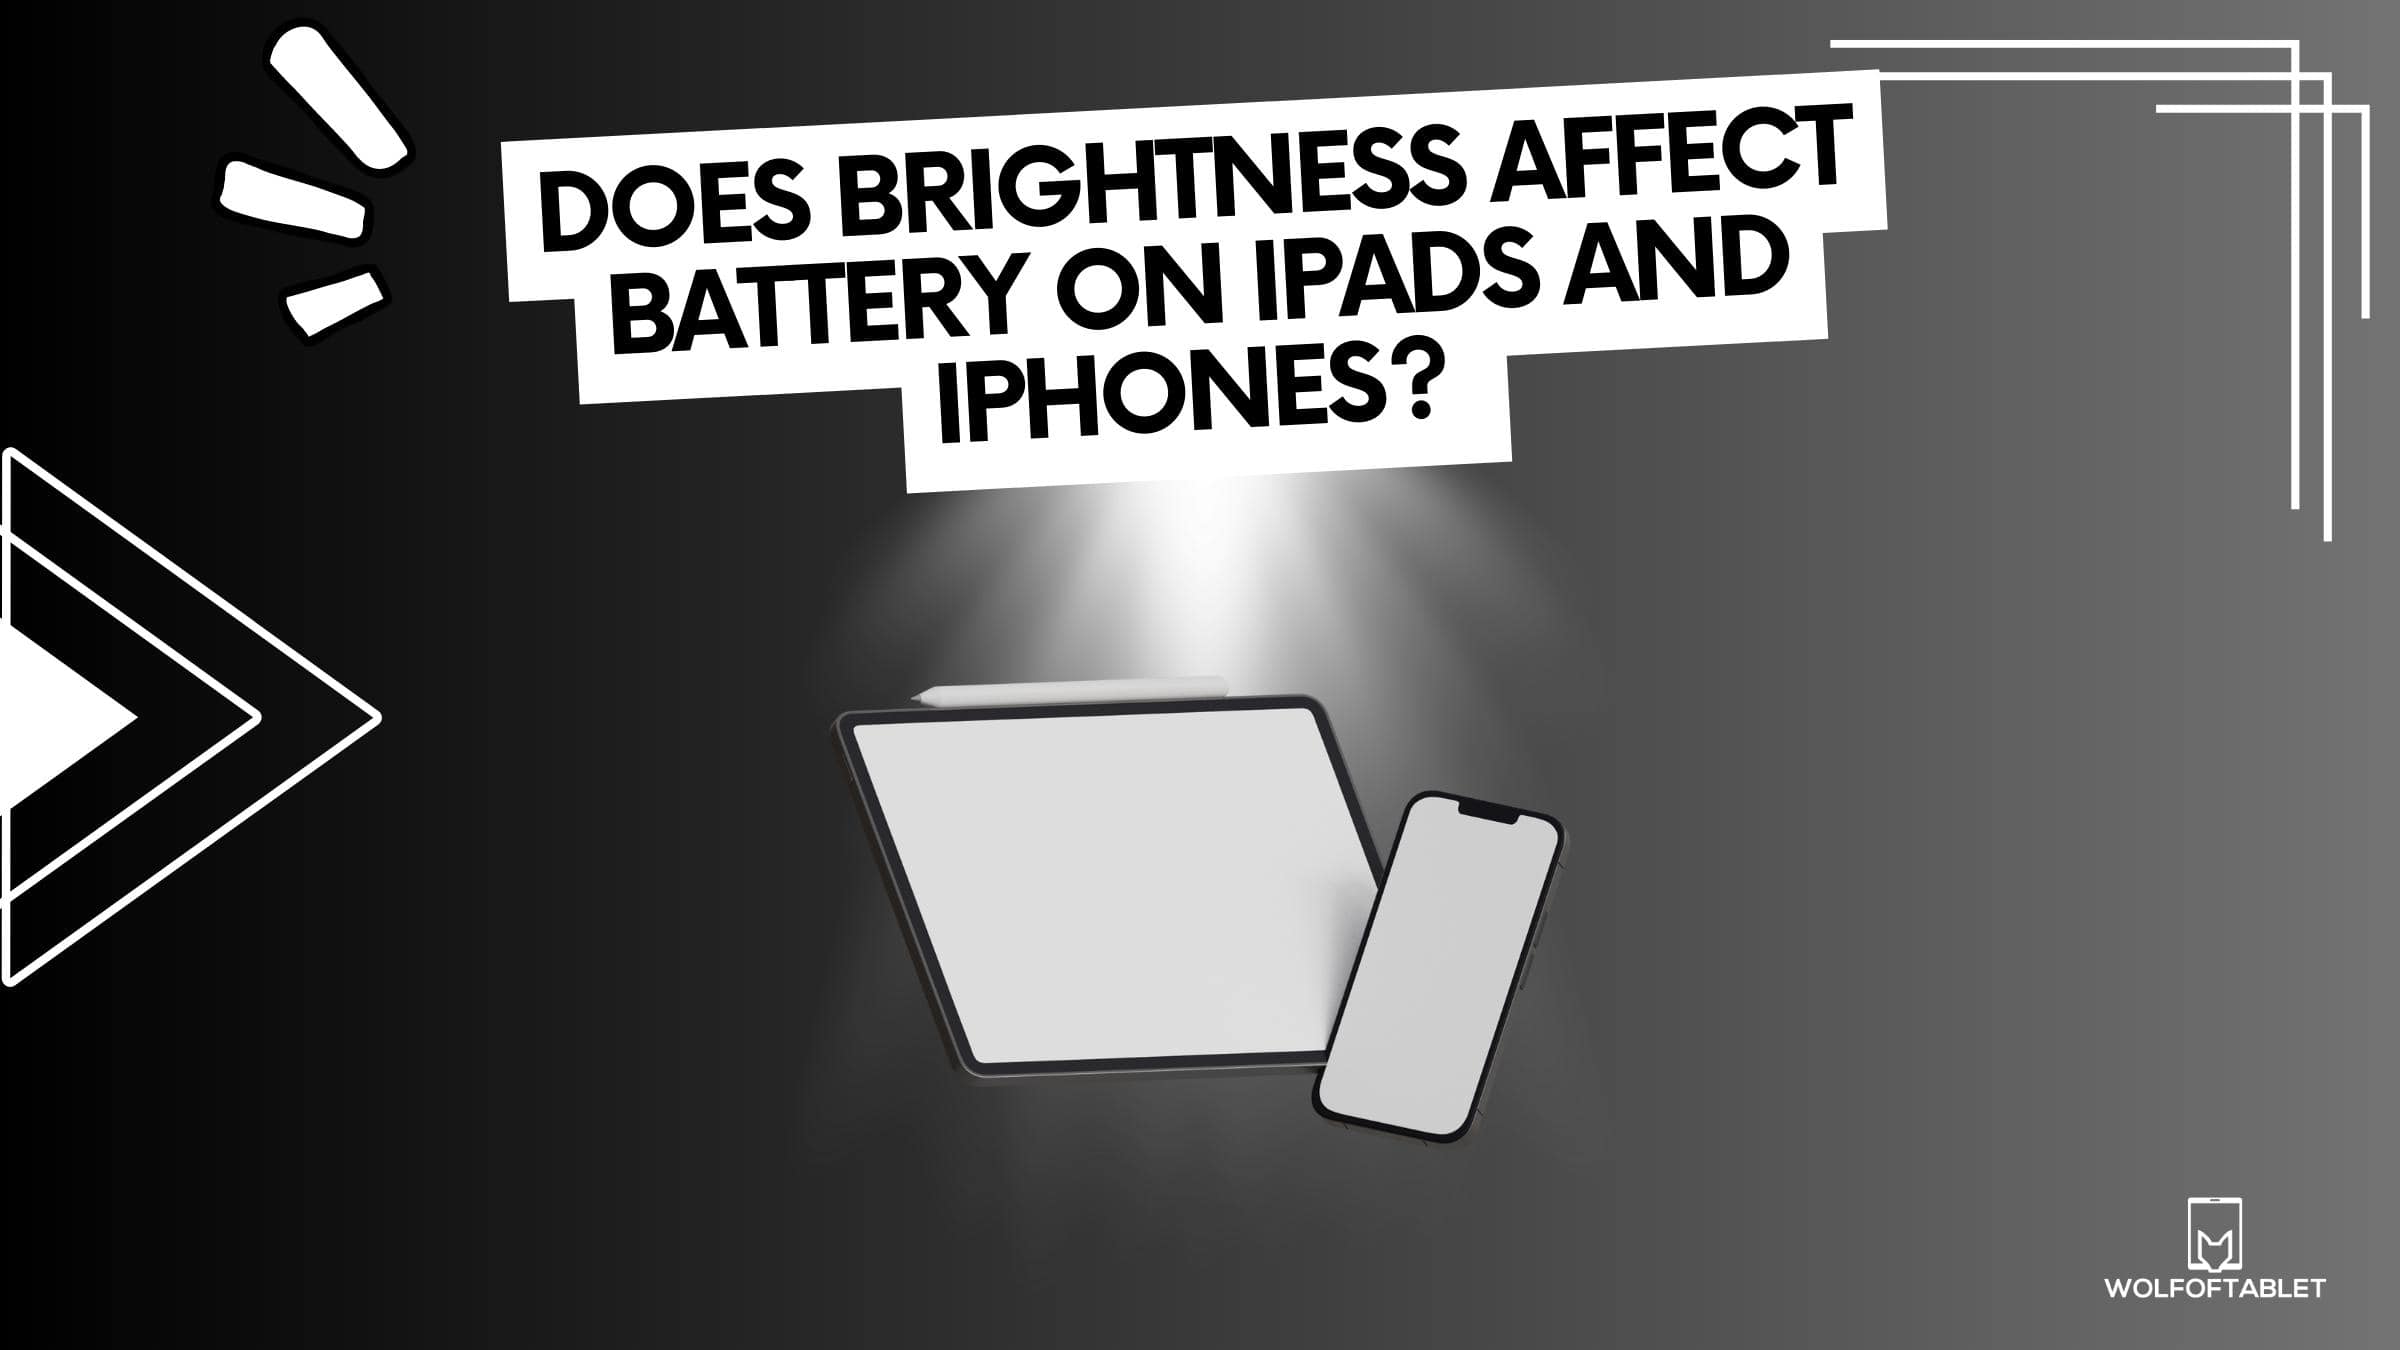 Does Brightness Affect Battery on iPads and iPhones? 